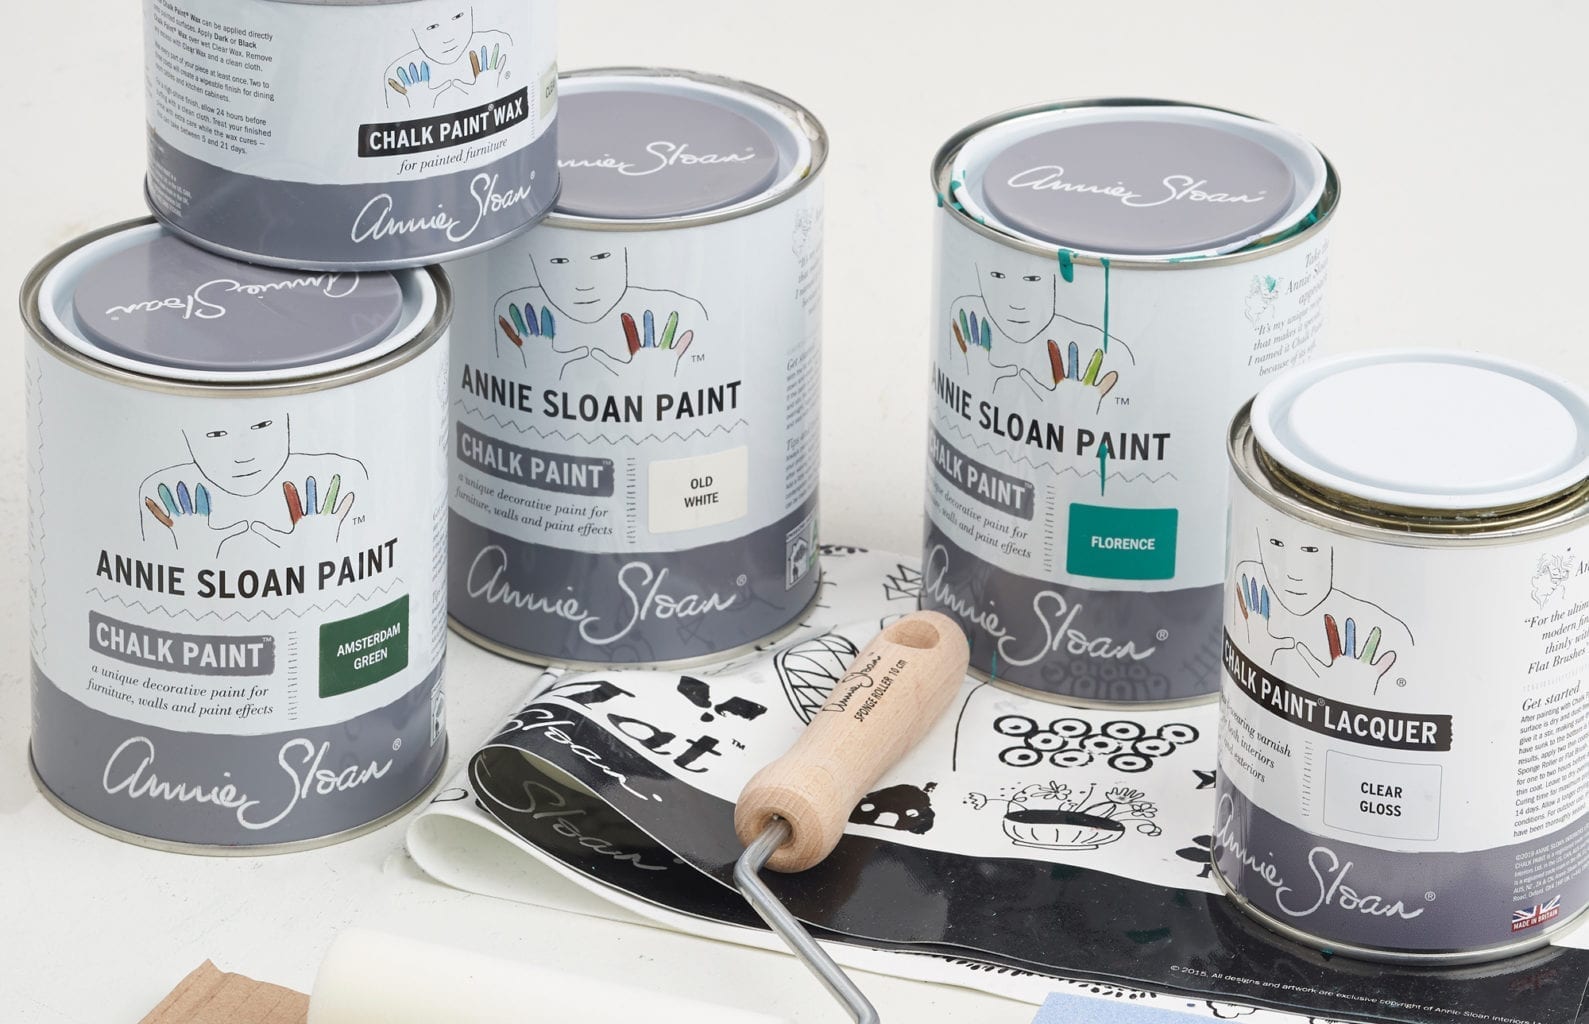 Chalk Paint® by Annie Sloan tins with Wax and Lacquer and a Sponge Roller and a MixMat